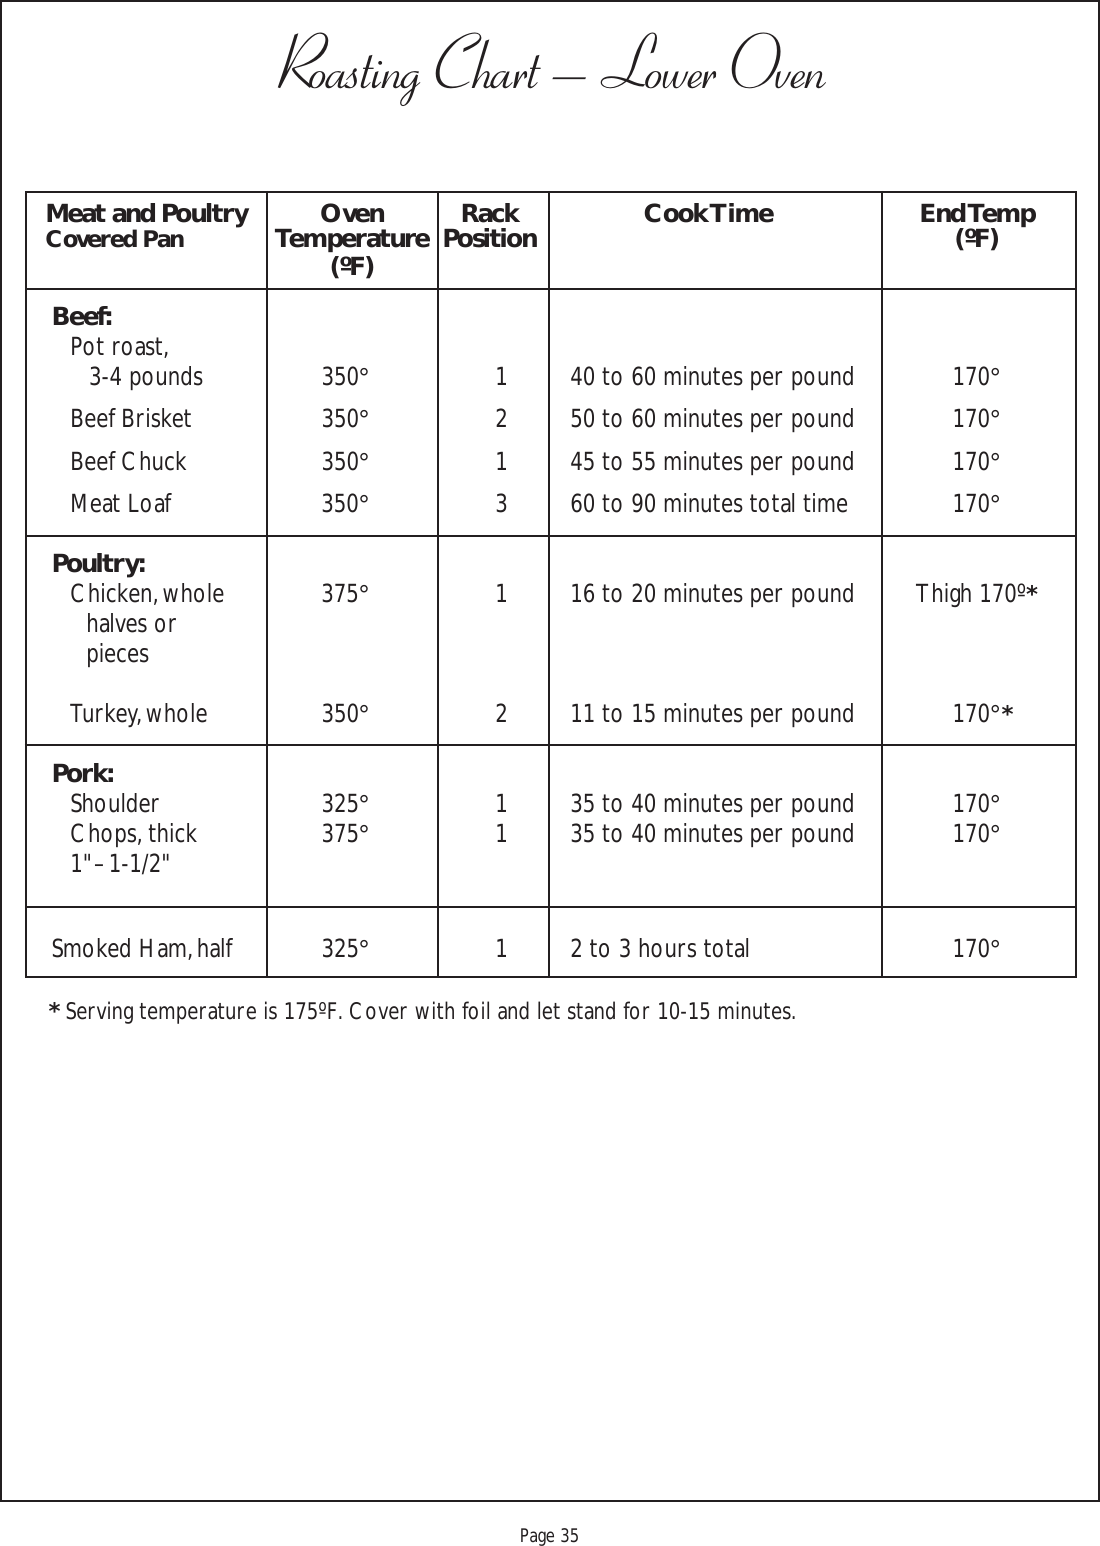 Proof 9-21-99Page 35Roasting Chart – Lower OvenMeat and Poultry Oven Rack Cook Time End TempCovered Pan Temperature Position (ºF)(ºF)Beef:Pot roast,3-4 pounds 350°1 40 to 60 minutes per pound 170°Beef Brisket 350°2 50 to 60 minutes per pound 170°Beef Chuck 350°1 45 to 55 minutes per pound 170°Meat Loaf 350°3 60 to 90 minutes total time 170°Poultry:Chicken, whole 375°1 16 to 20 minutes per pound Thigh 170º*     halves or     piecesTurkey, whole 350°2 11 to 15 minutes per pound 170°*Pork:Shoulder 325°1 35 to 40 minutes per pound 170°   Chops, thick 375°1 35 to 40 minutes per pound 170°1&quot; – 1-1/2&quot;Smoked Ham, half 325°1 2 to 3 hours total 170°* Serving temperature is 175ºF. Cover with foil and let stand for 10-15 minutes.